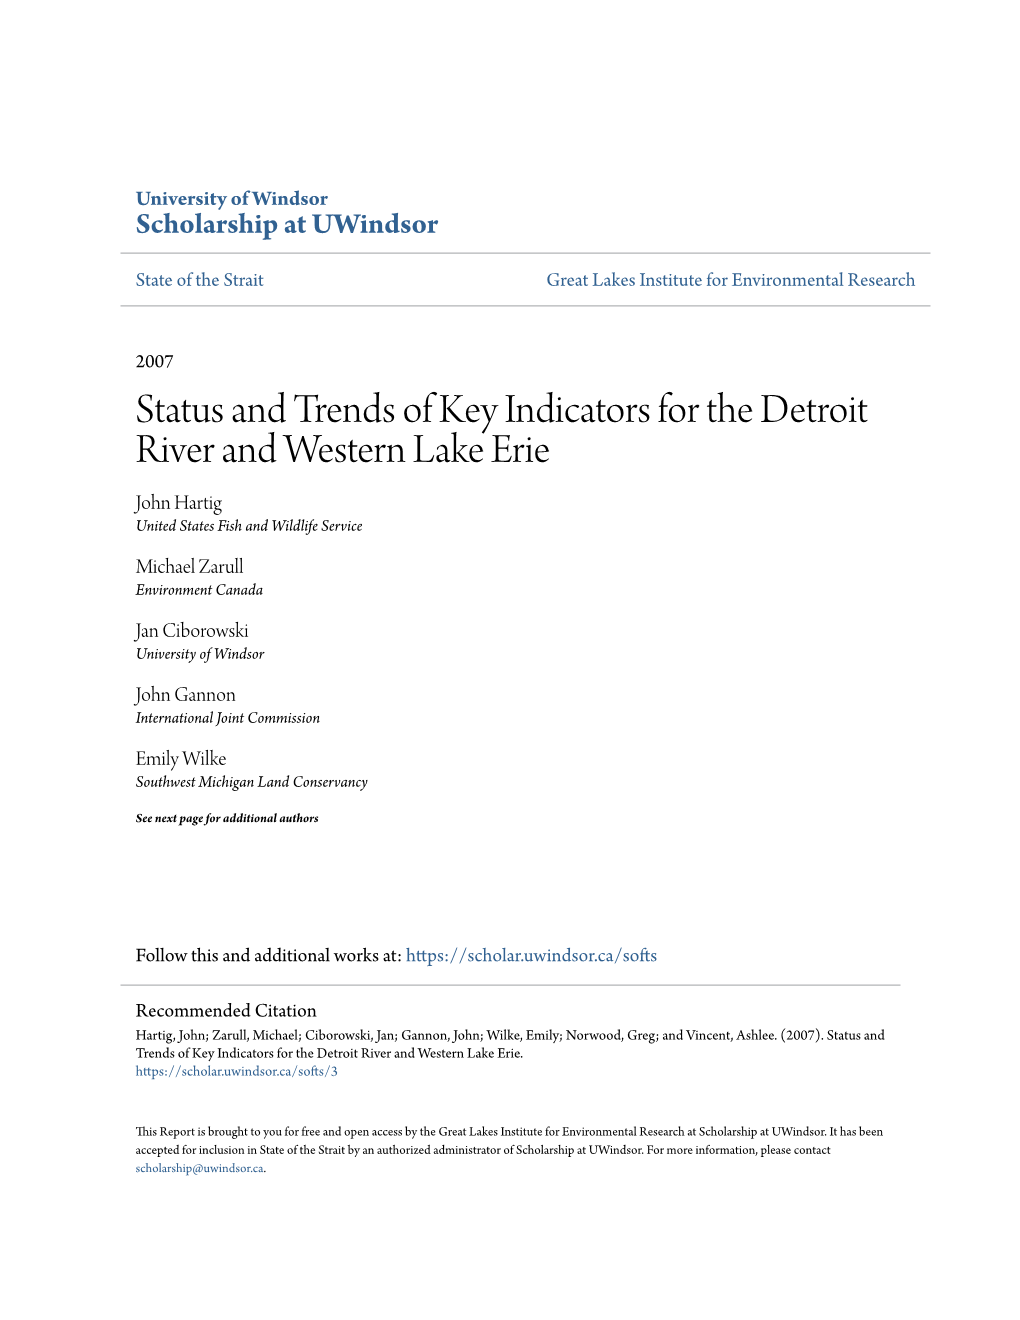 Status and Trends of Key Indicators for the Detroit River and Western Lake Erie John Hartig United States Fish and Wildlife Service